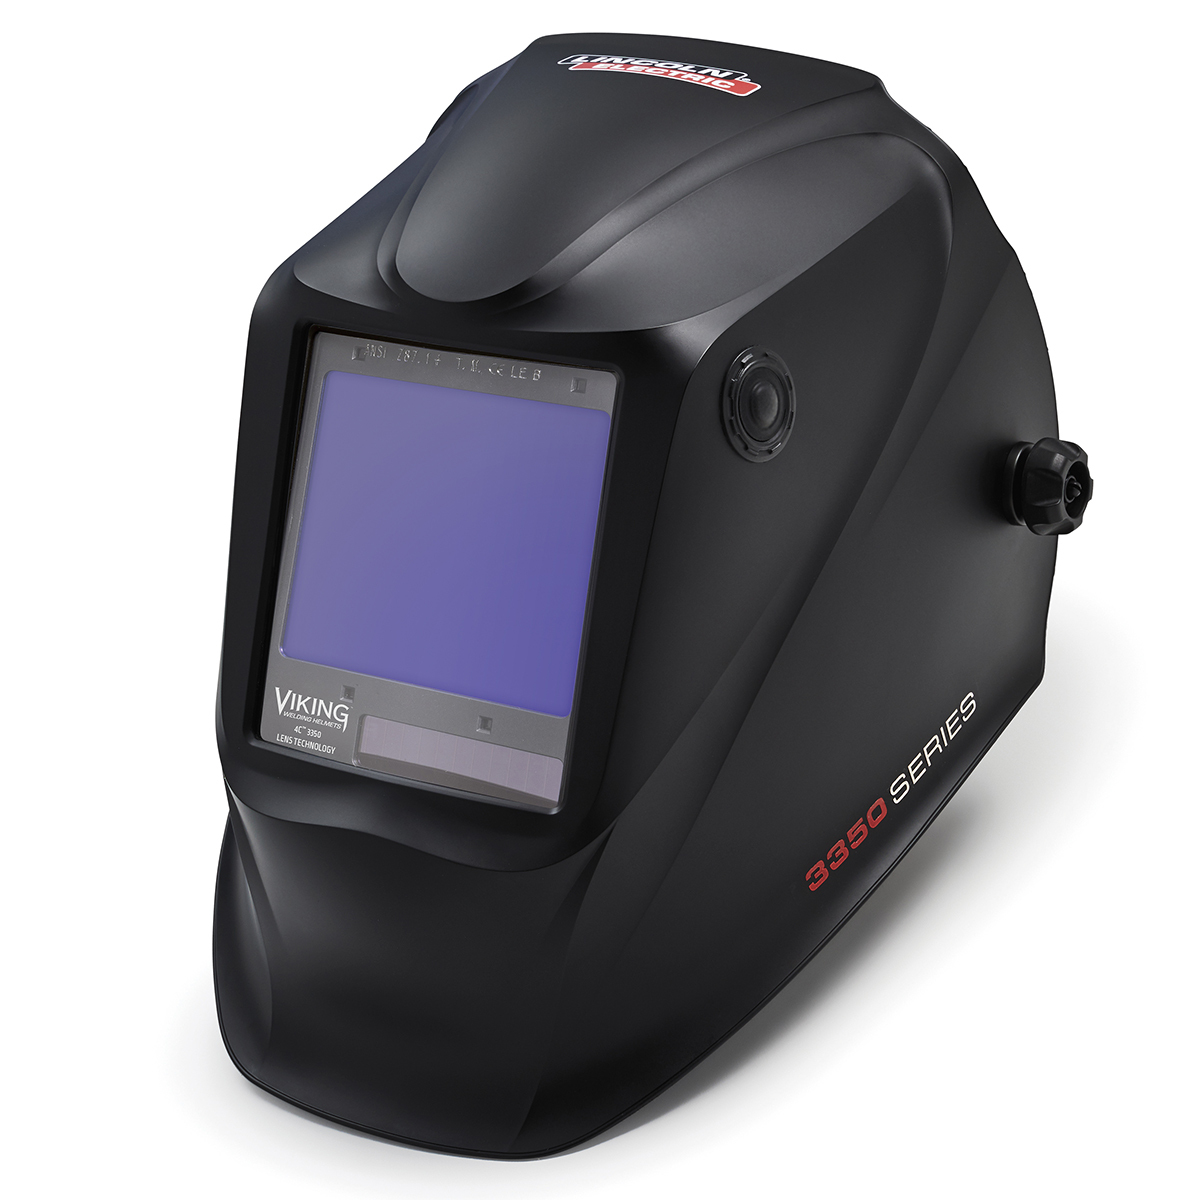 Lincoln Electric® VIKING® 3350 Black Welding Helmet With Variable Shades 5 - 13 Auto Darkening Lens 4C® Lens Technology